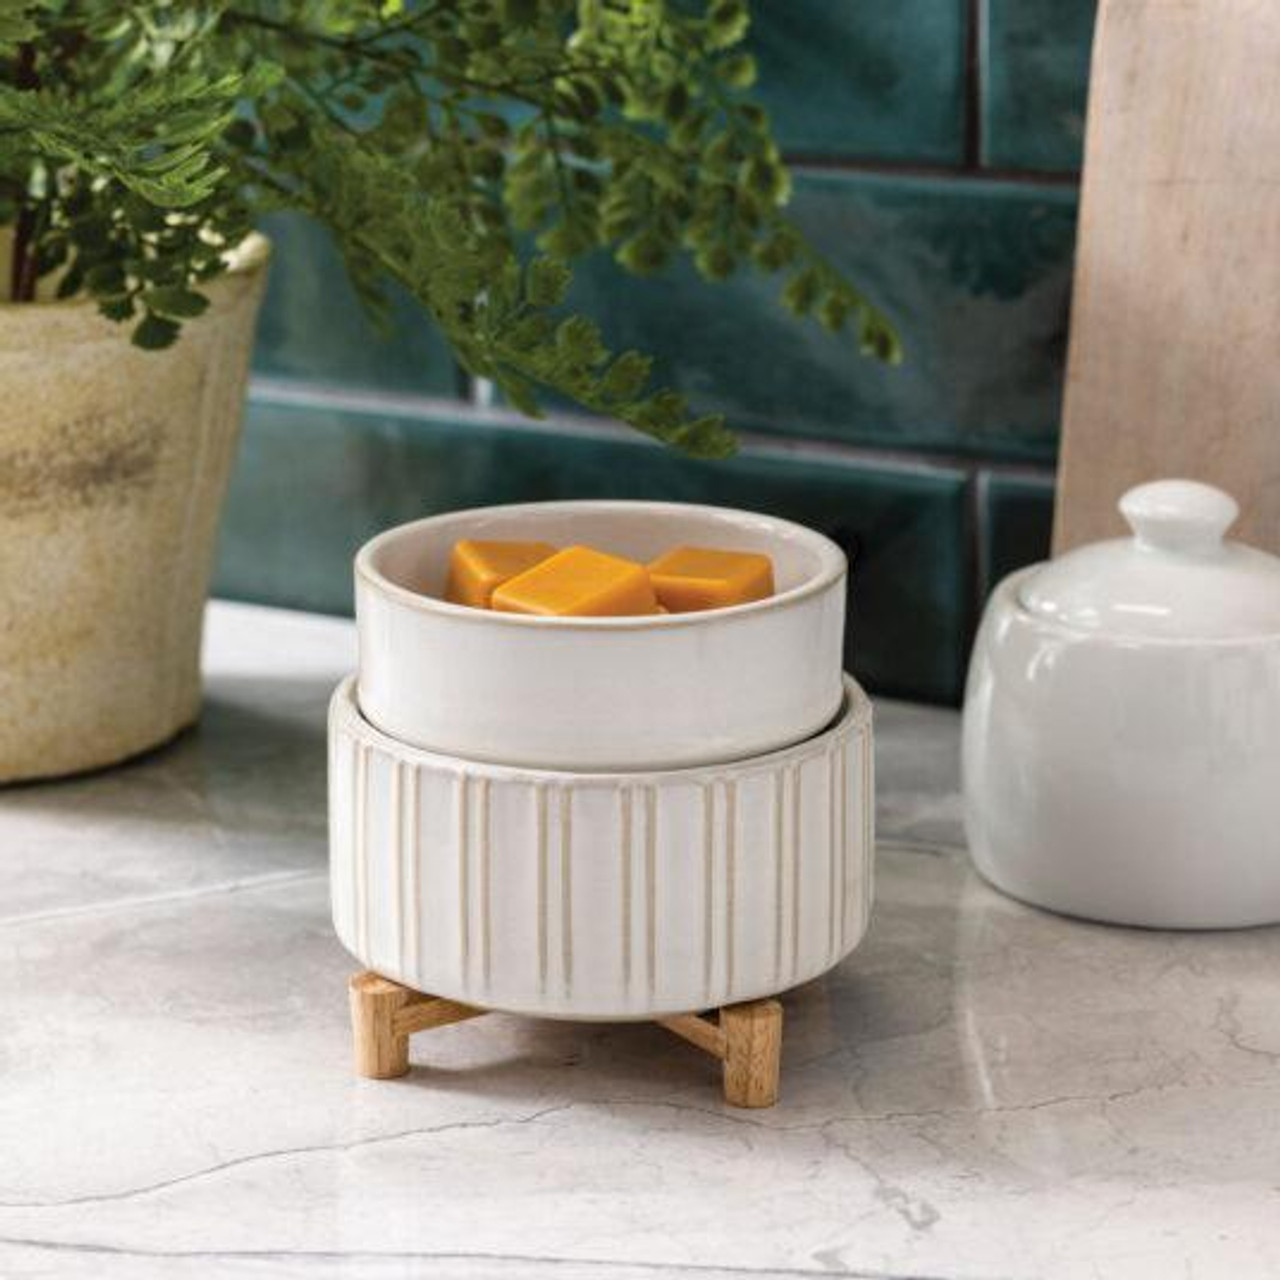 Wax Warmer-Ceramic & Wood 2 in 1 Classic. 1803 Candles - Best